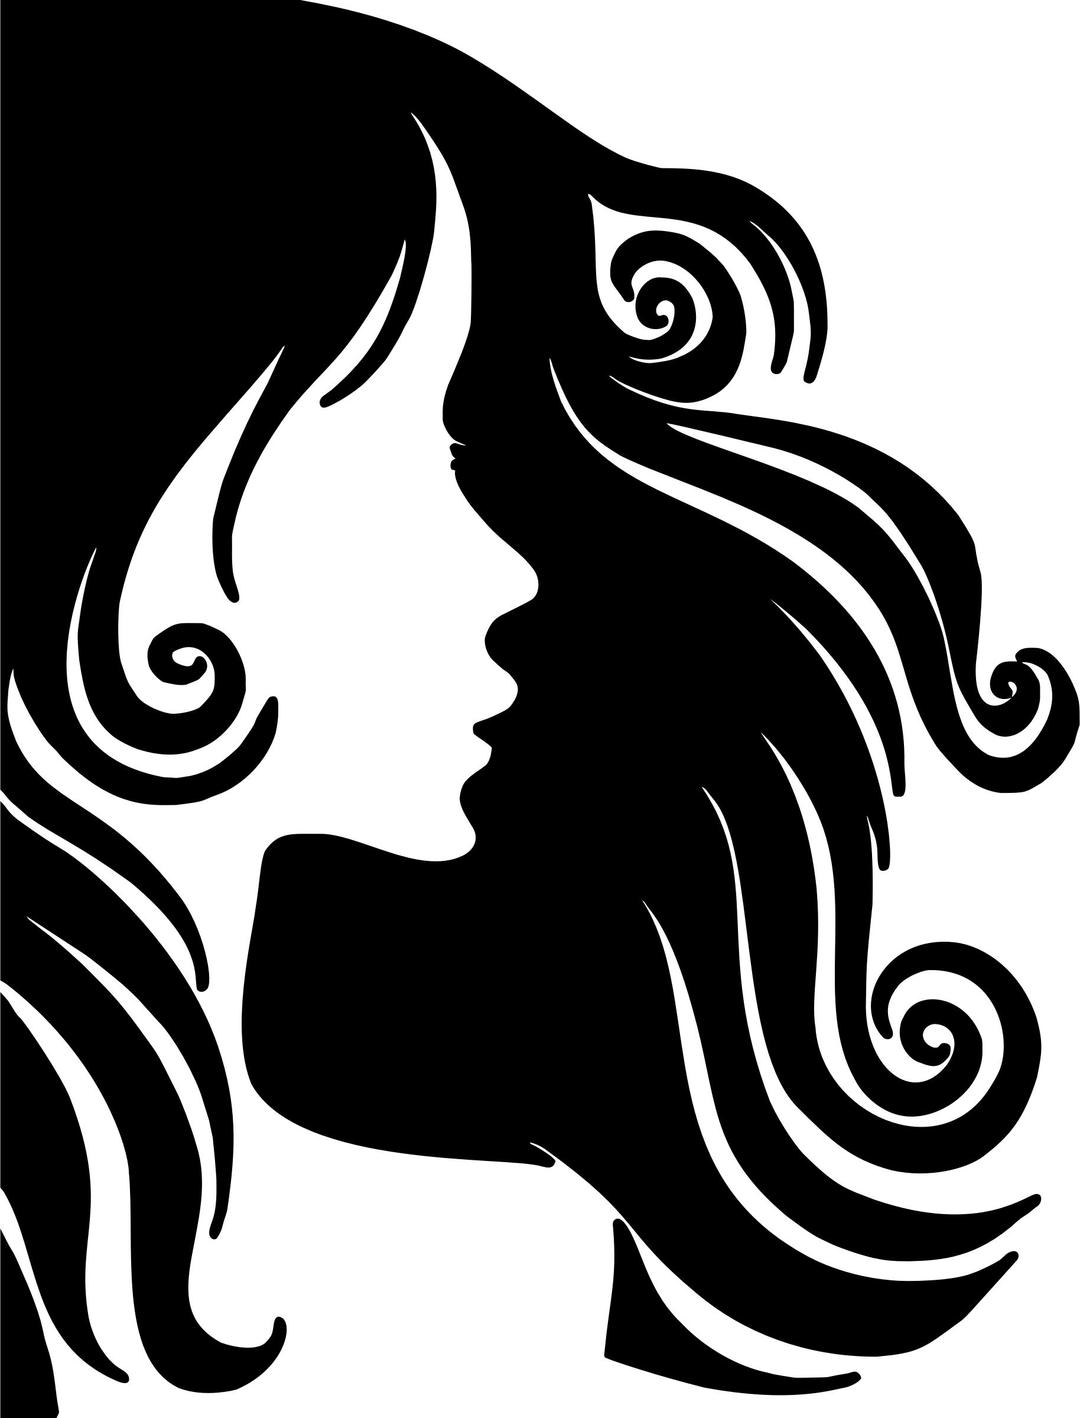 Female Hair Profile Silhouette png transparent